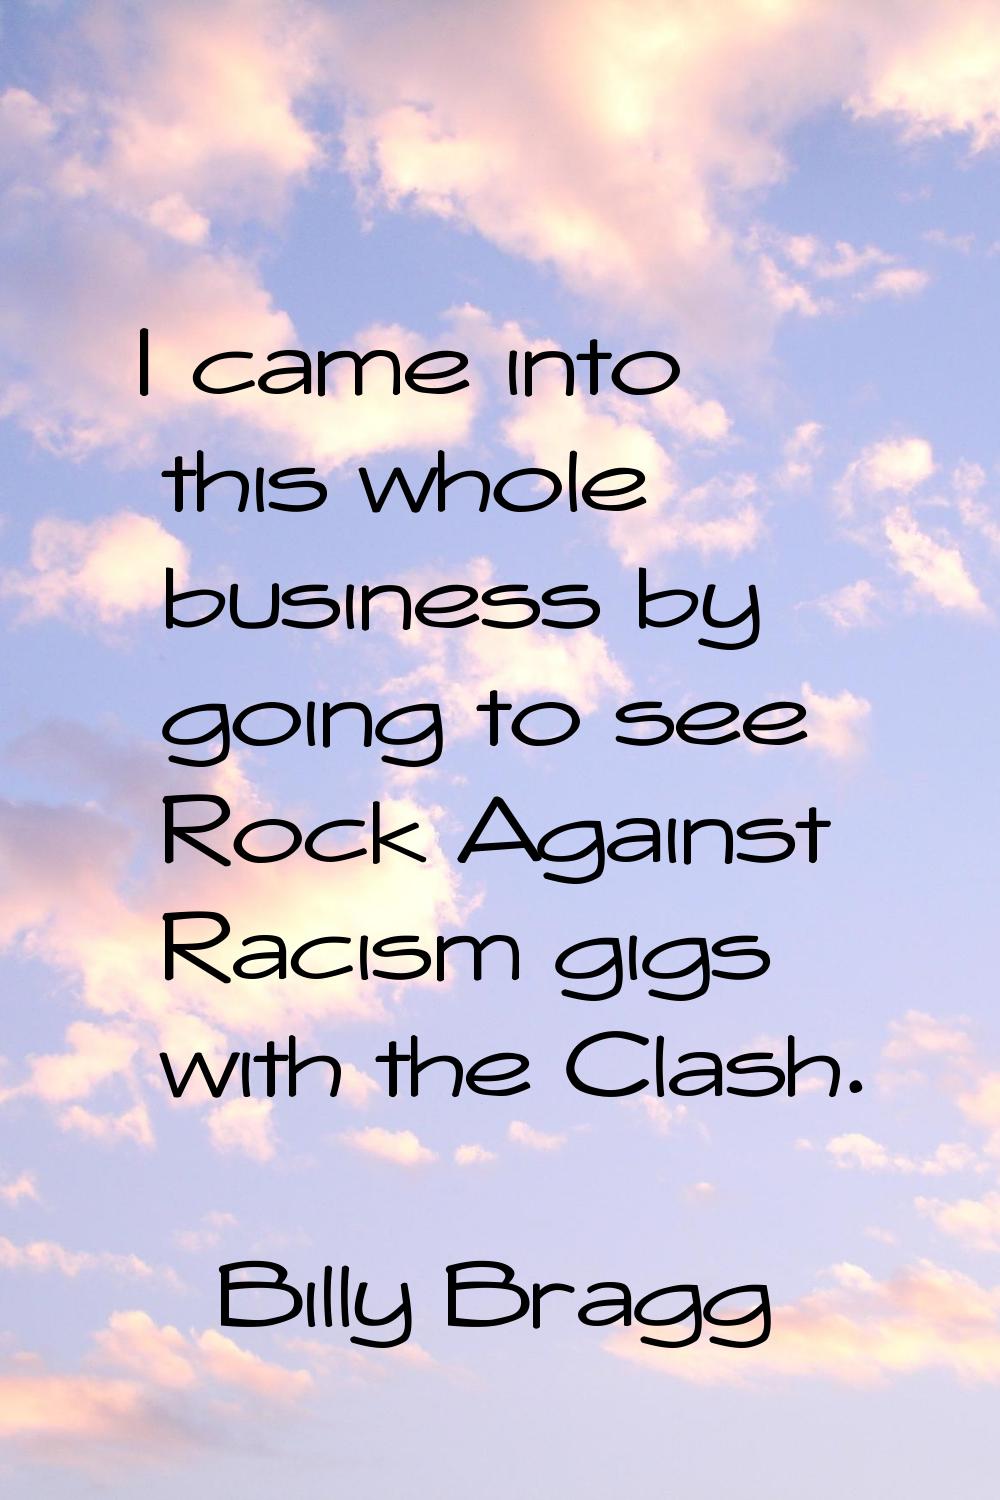 I came into this whole business by going to see Rock Against Racism gigs with the Clash.